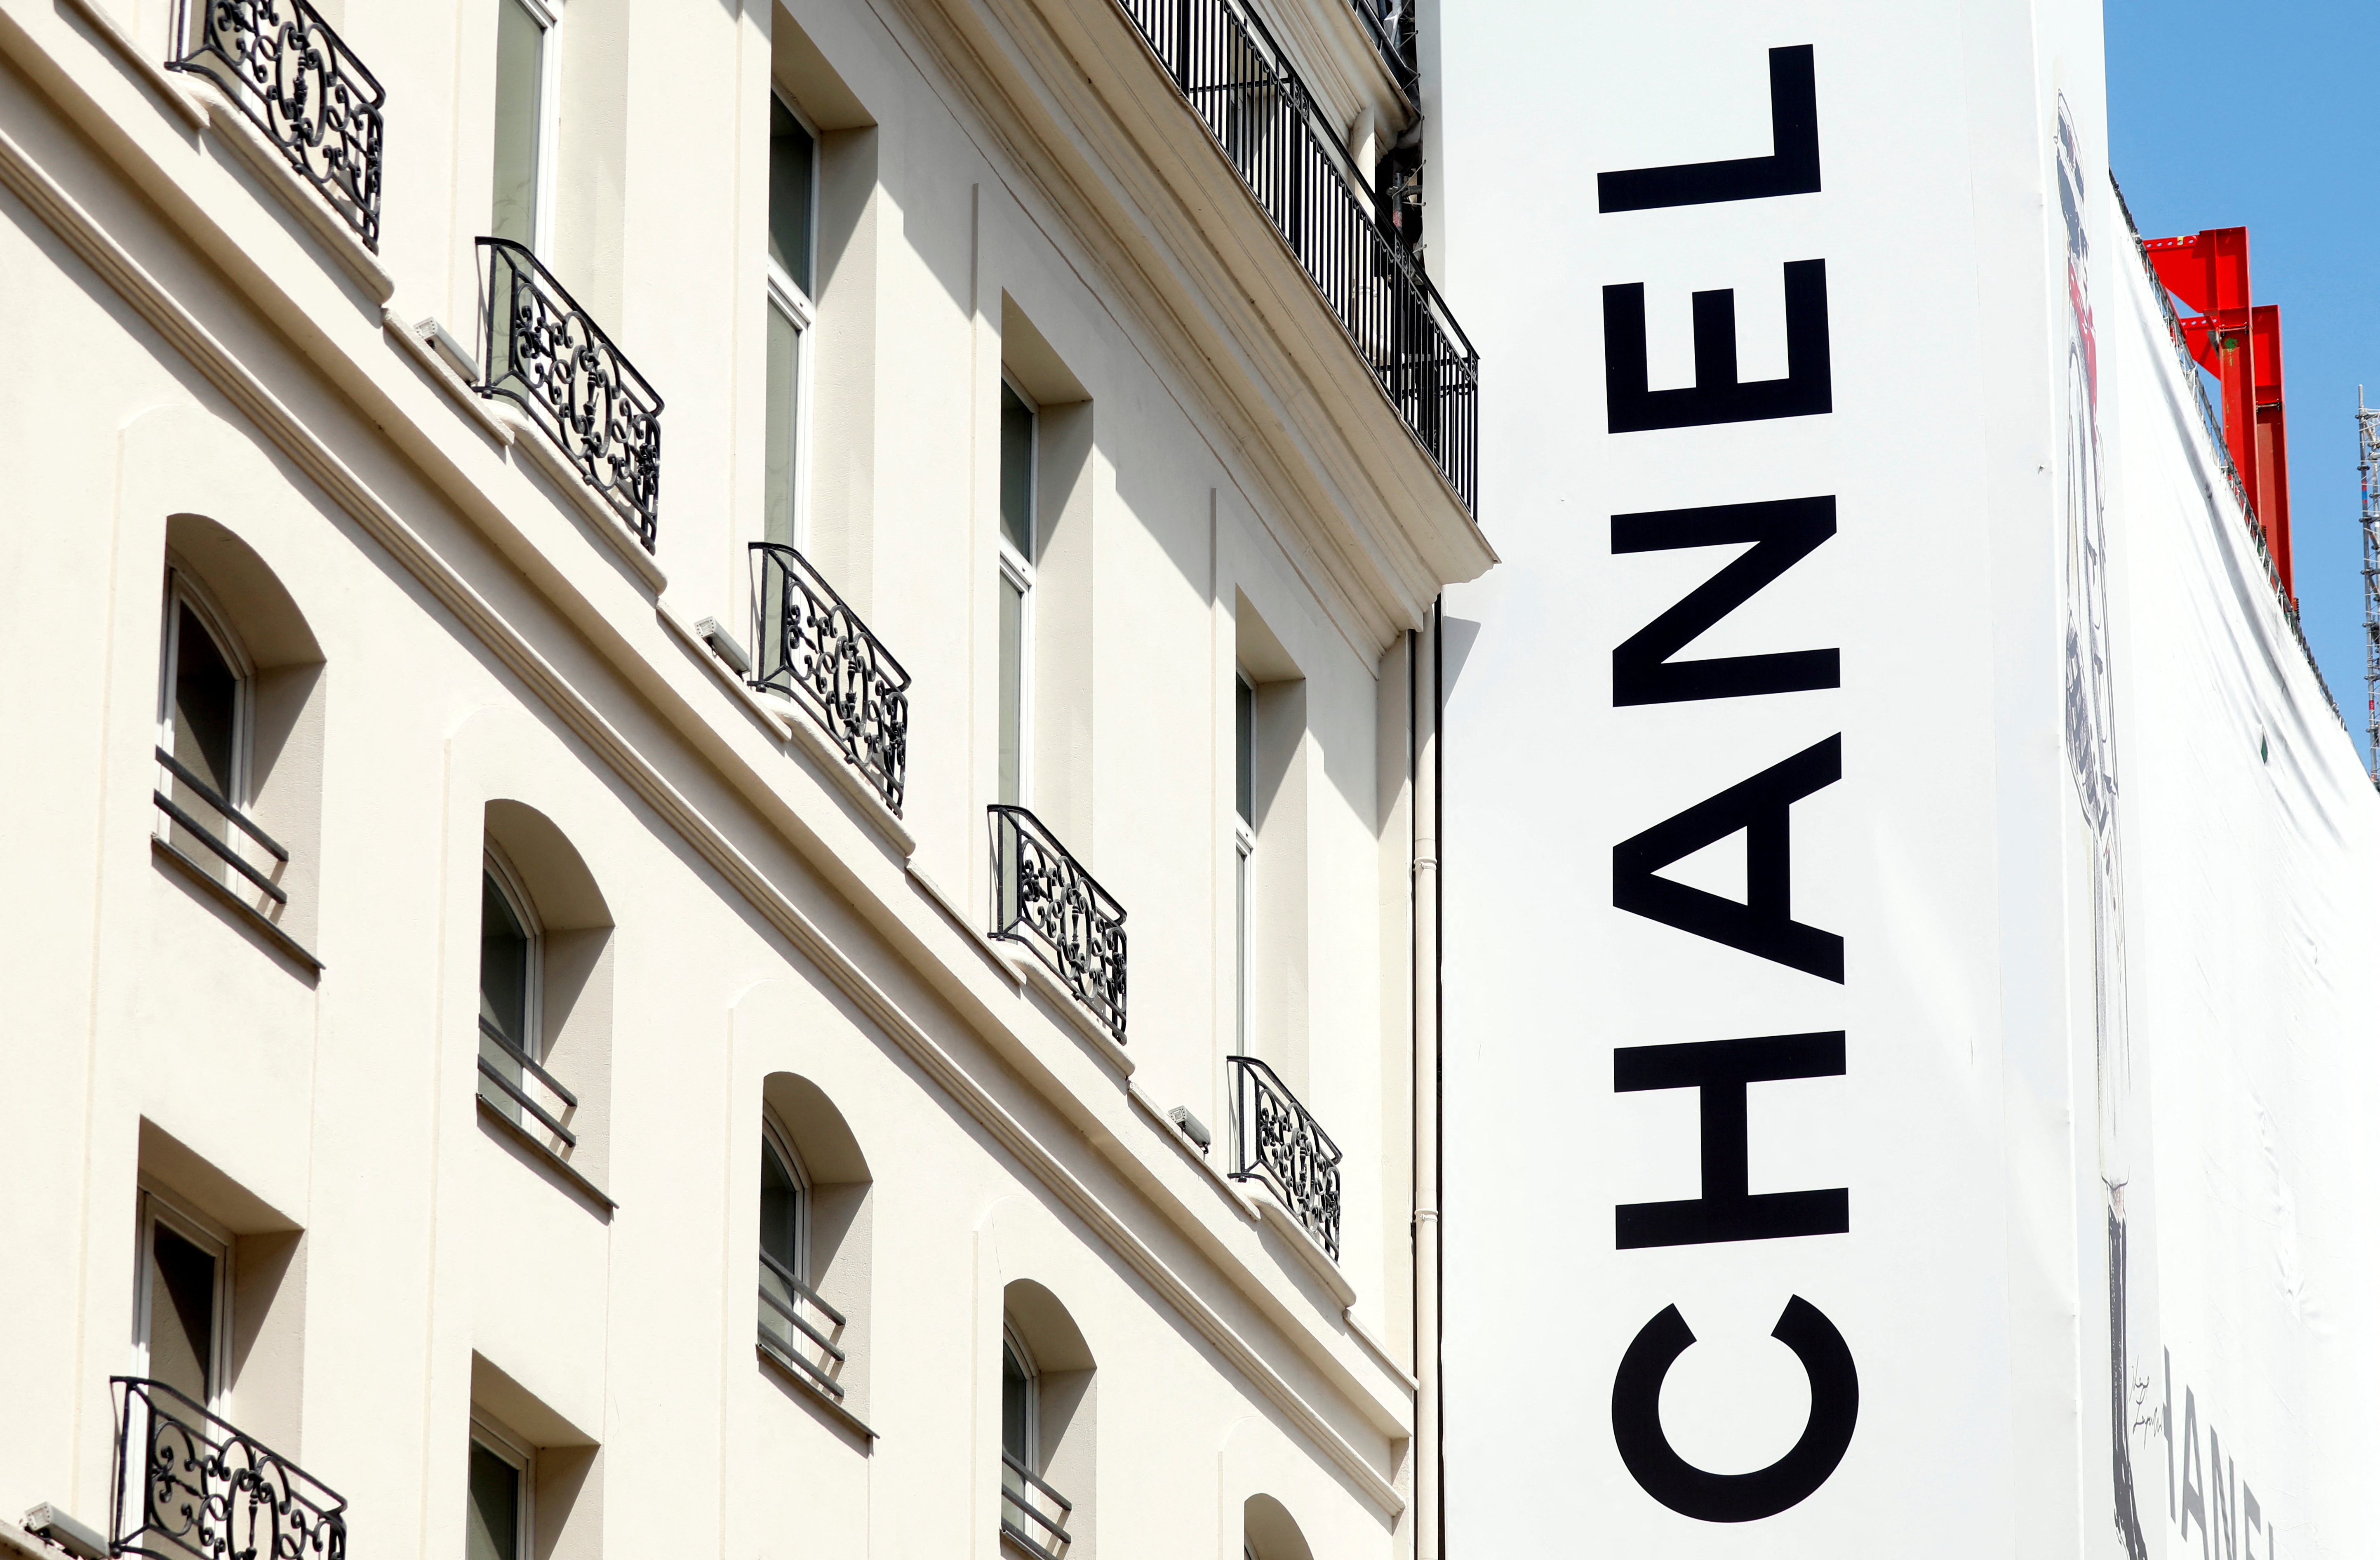 chanel price increase over the years